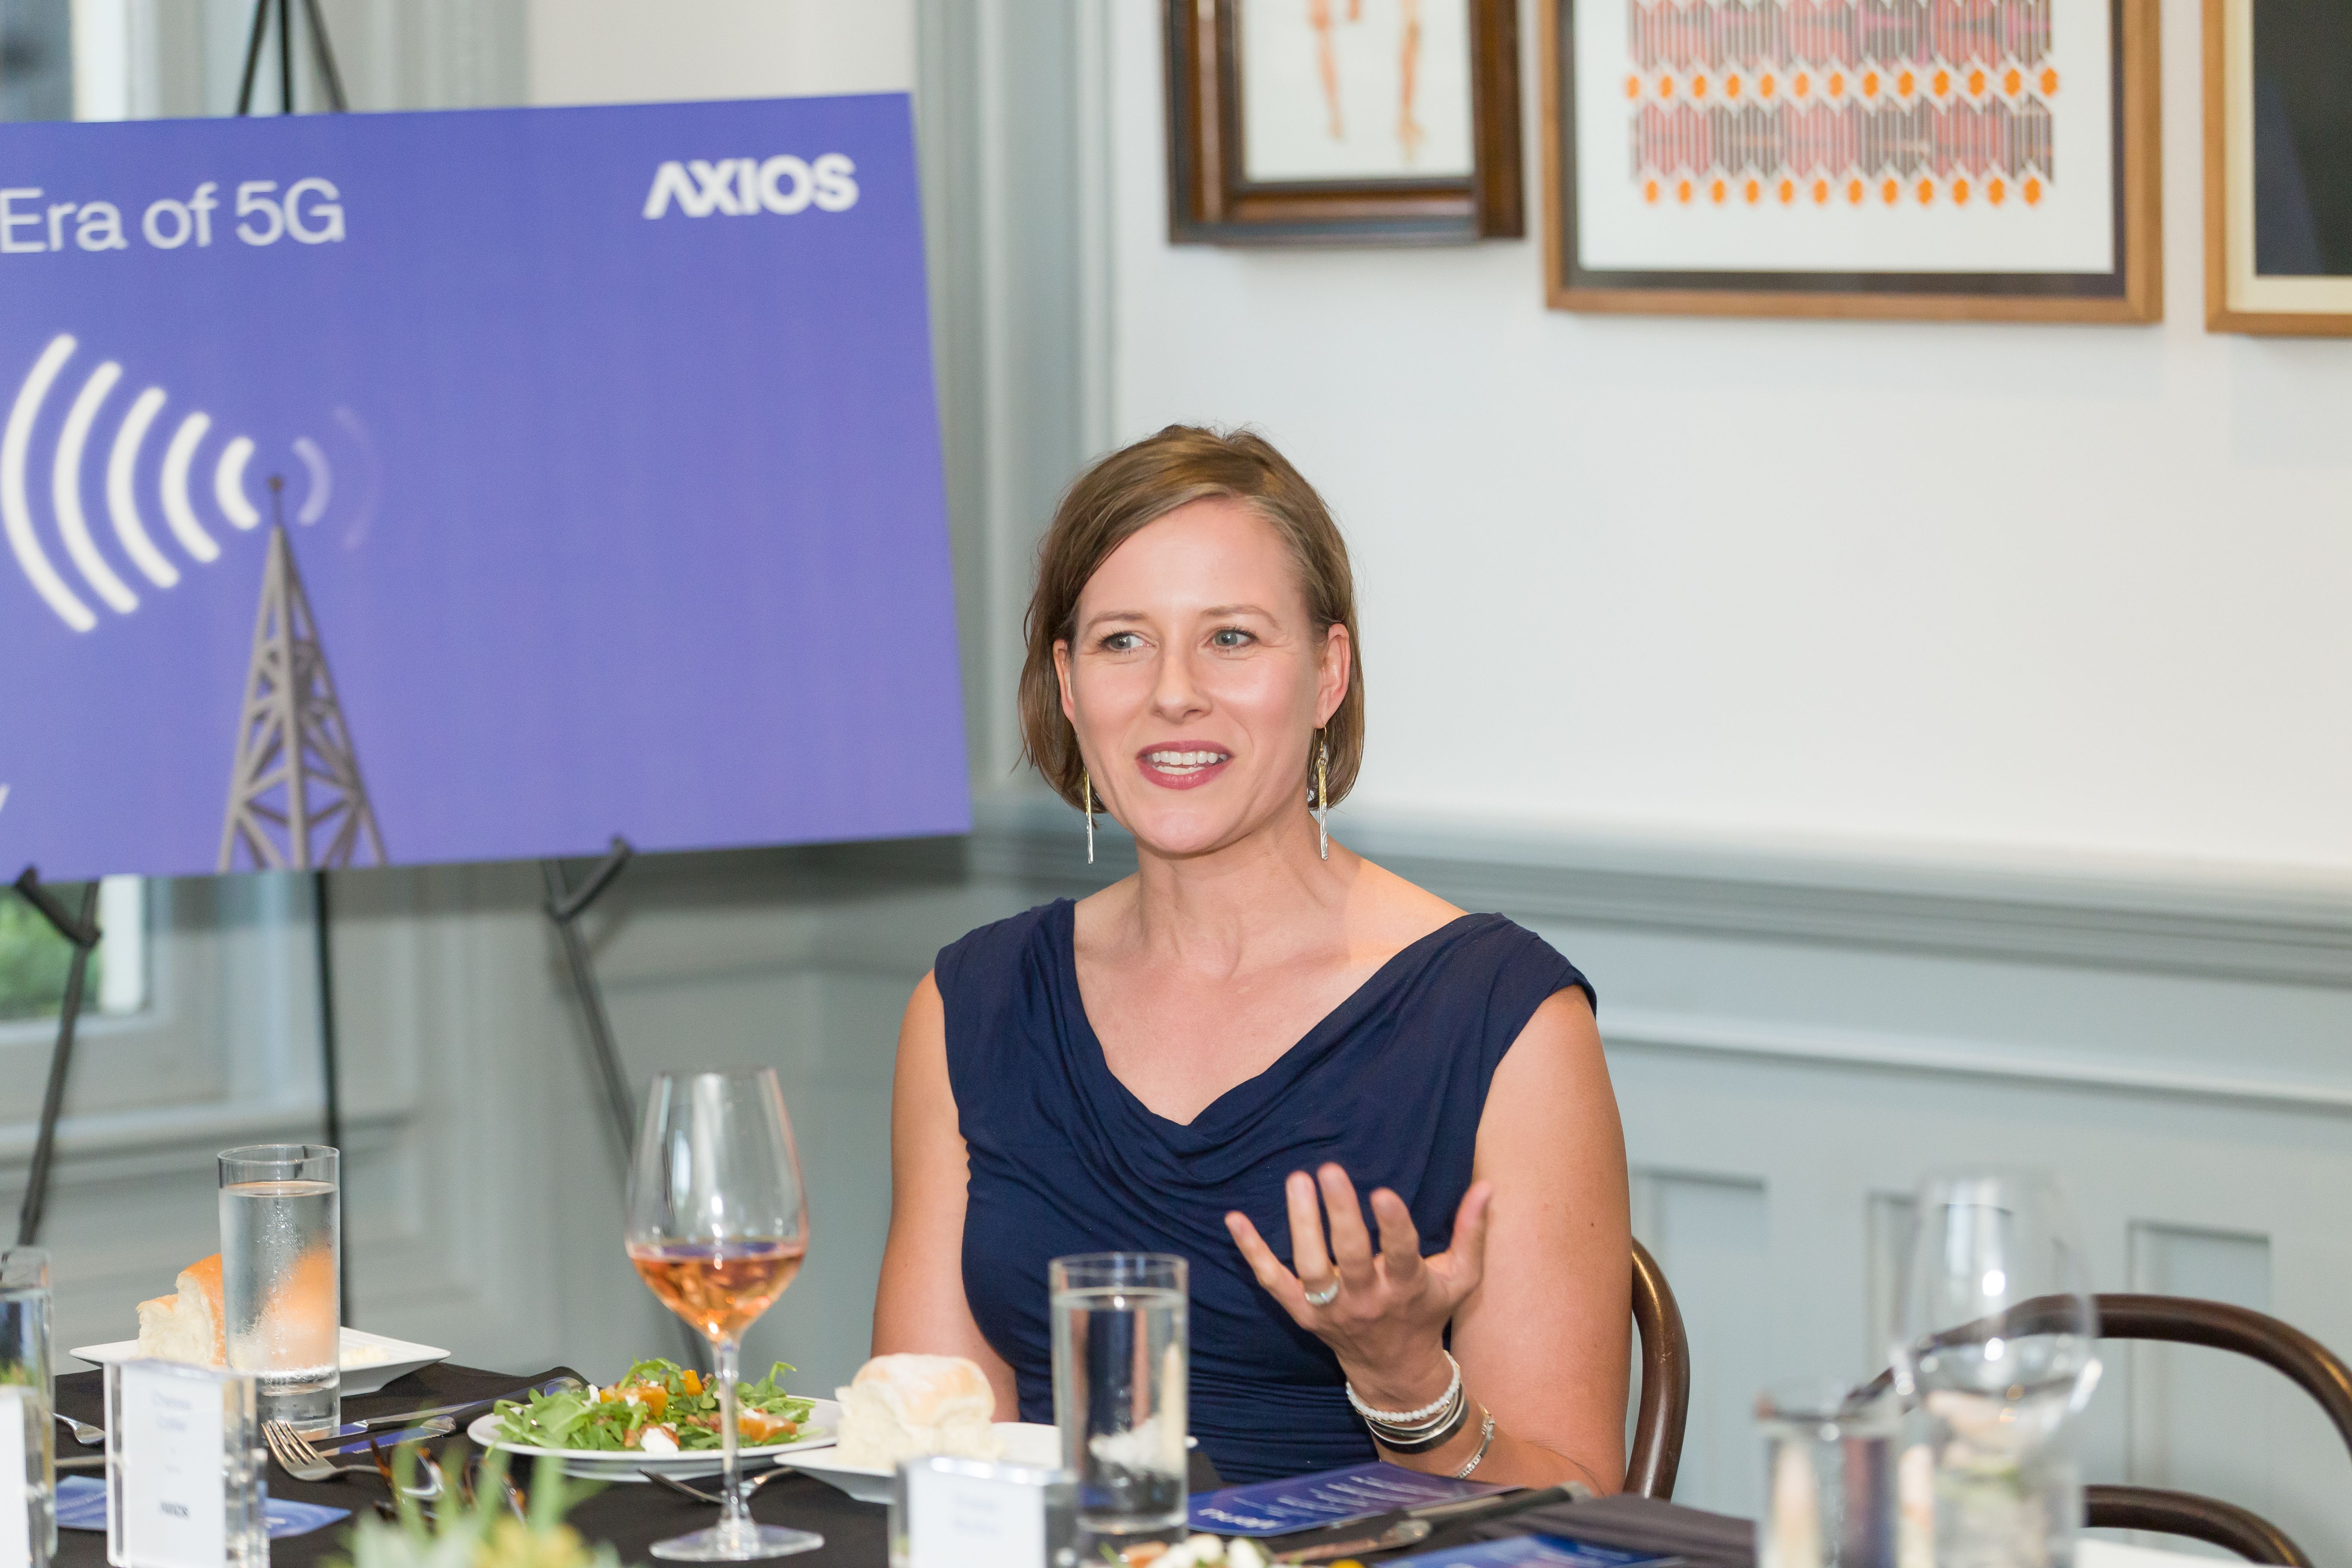 Digi.City founder Chelsea Collier speaking to the Axios roundtable group.